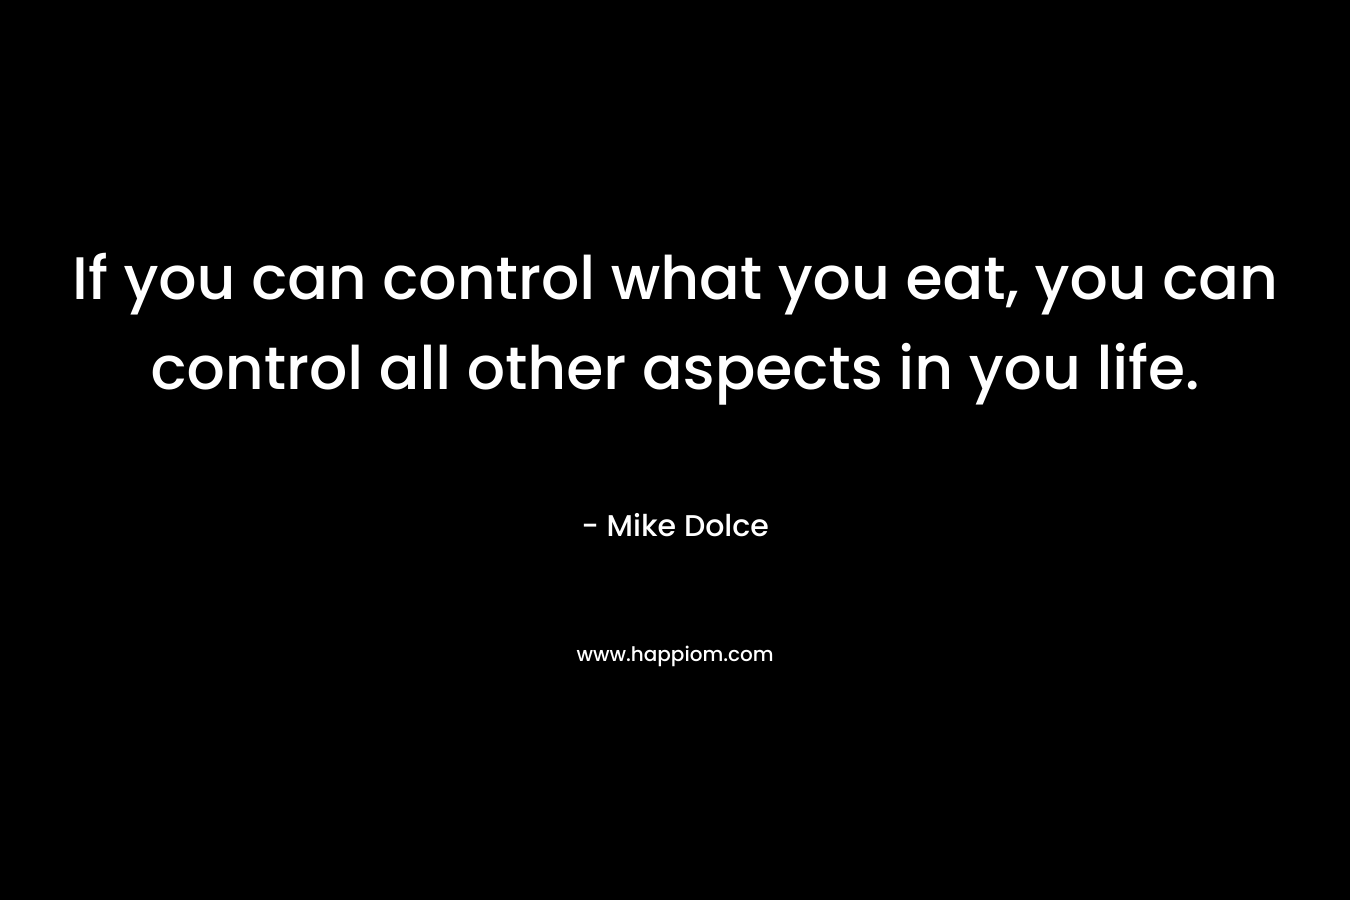 If you can control what you eat, you can control all other aspects in you life. – Mike Dolce